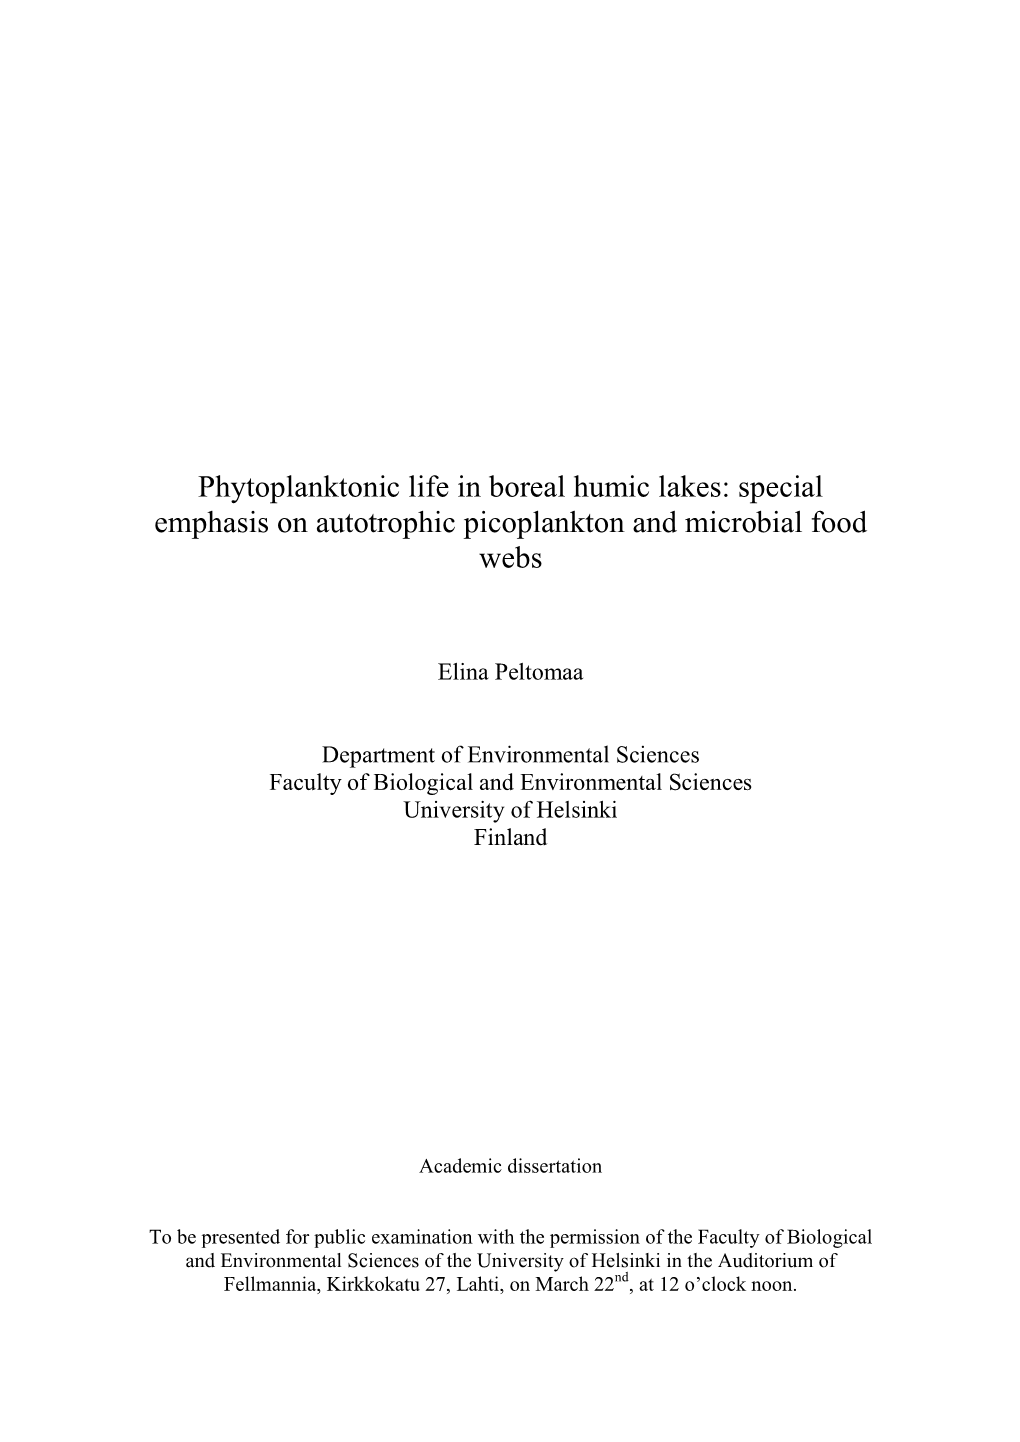 Phytoplanktonic Life in Boreal Humic Lakes: Special Emphasis on Autotrophic Picoplankton and Microbial Food Webs